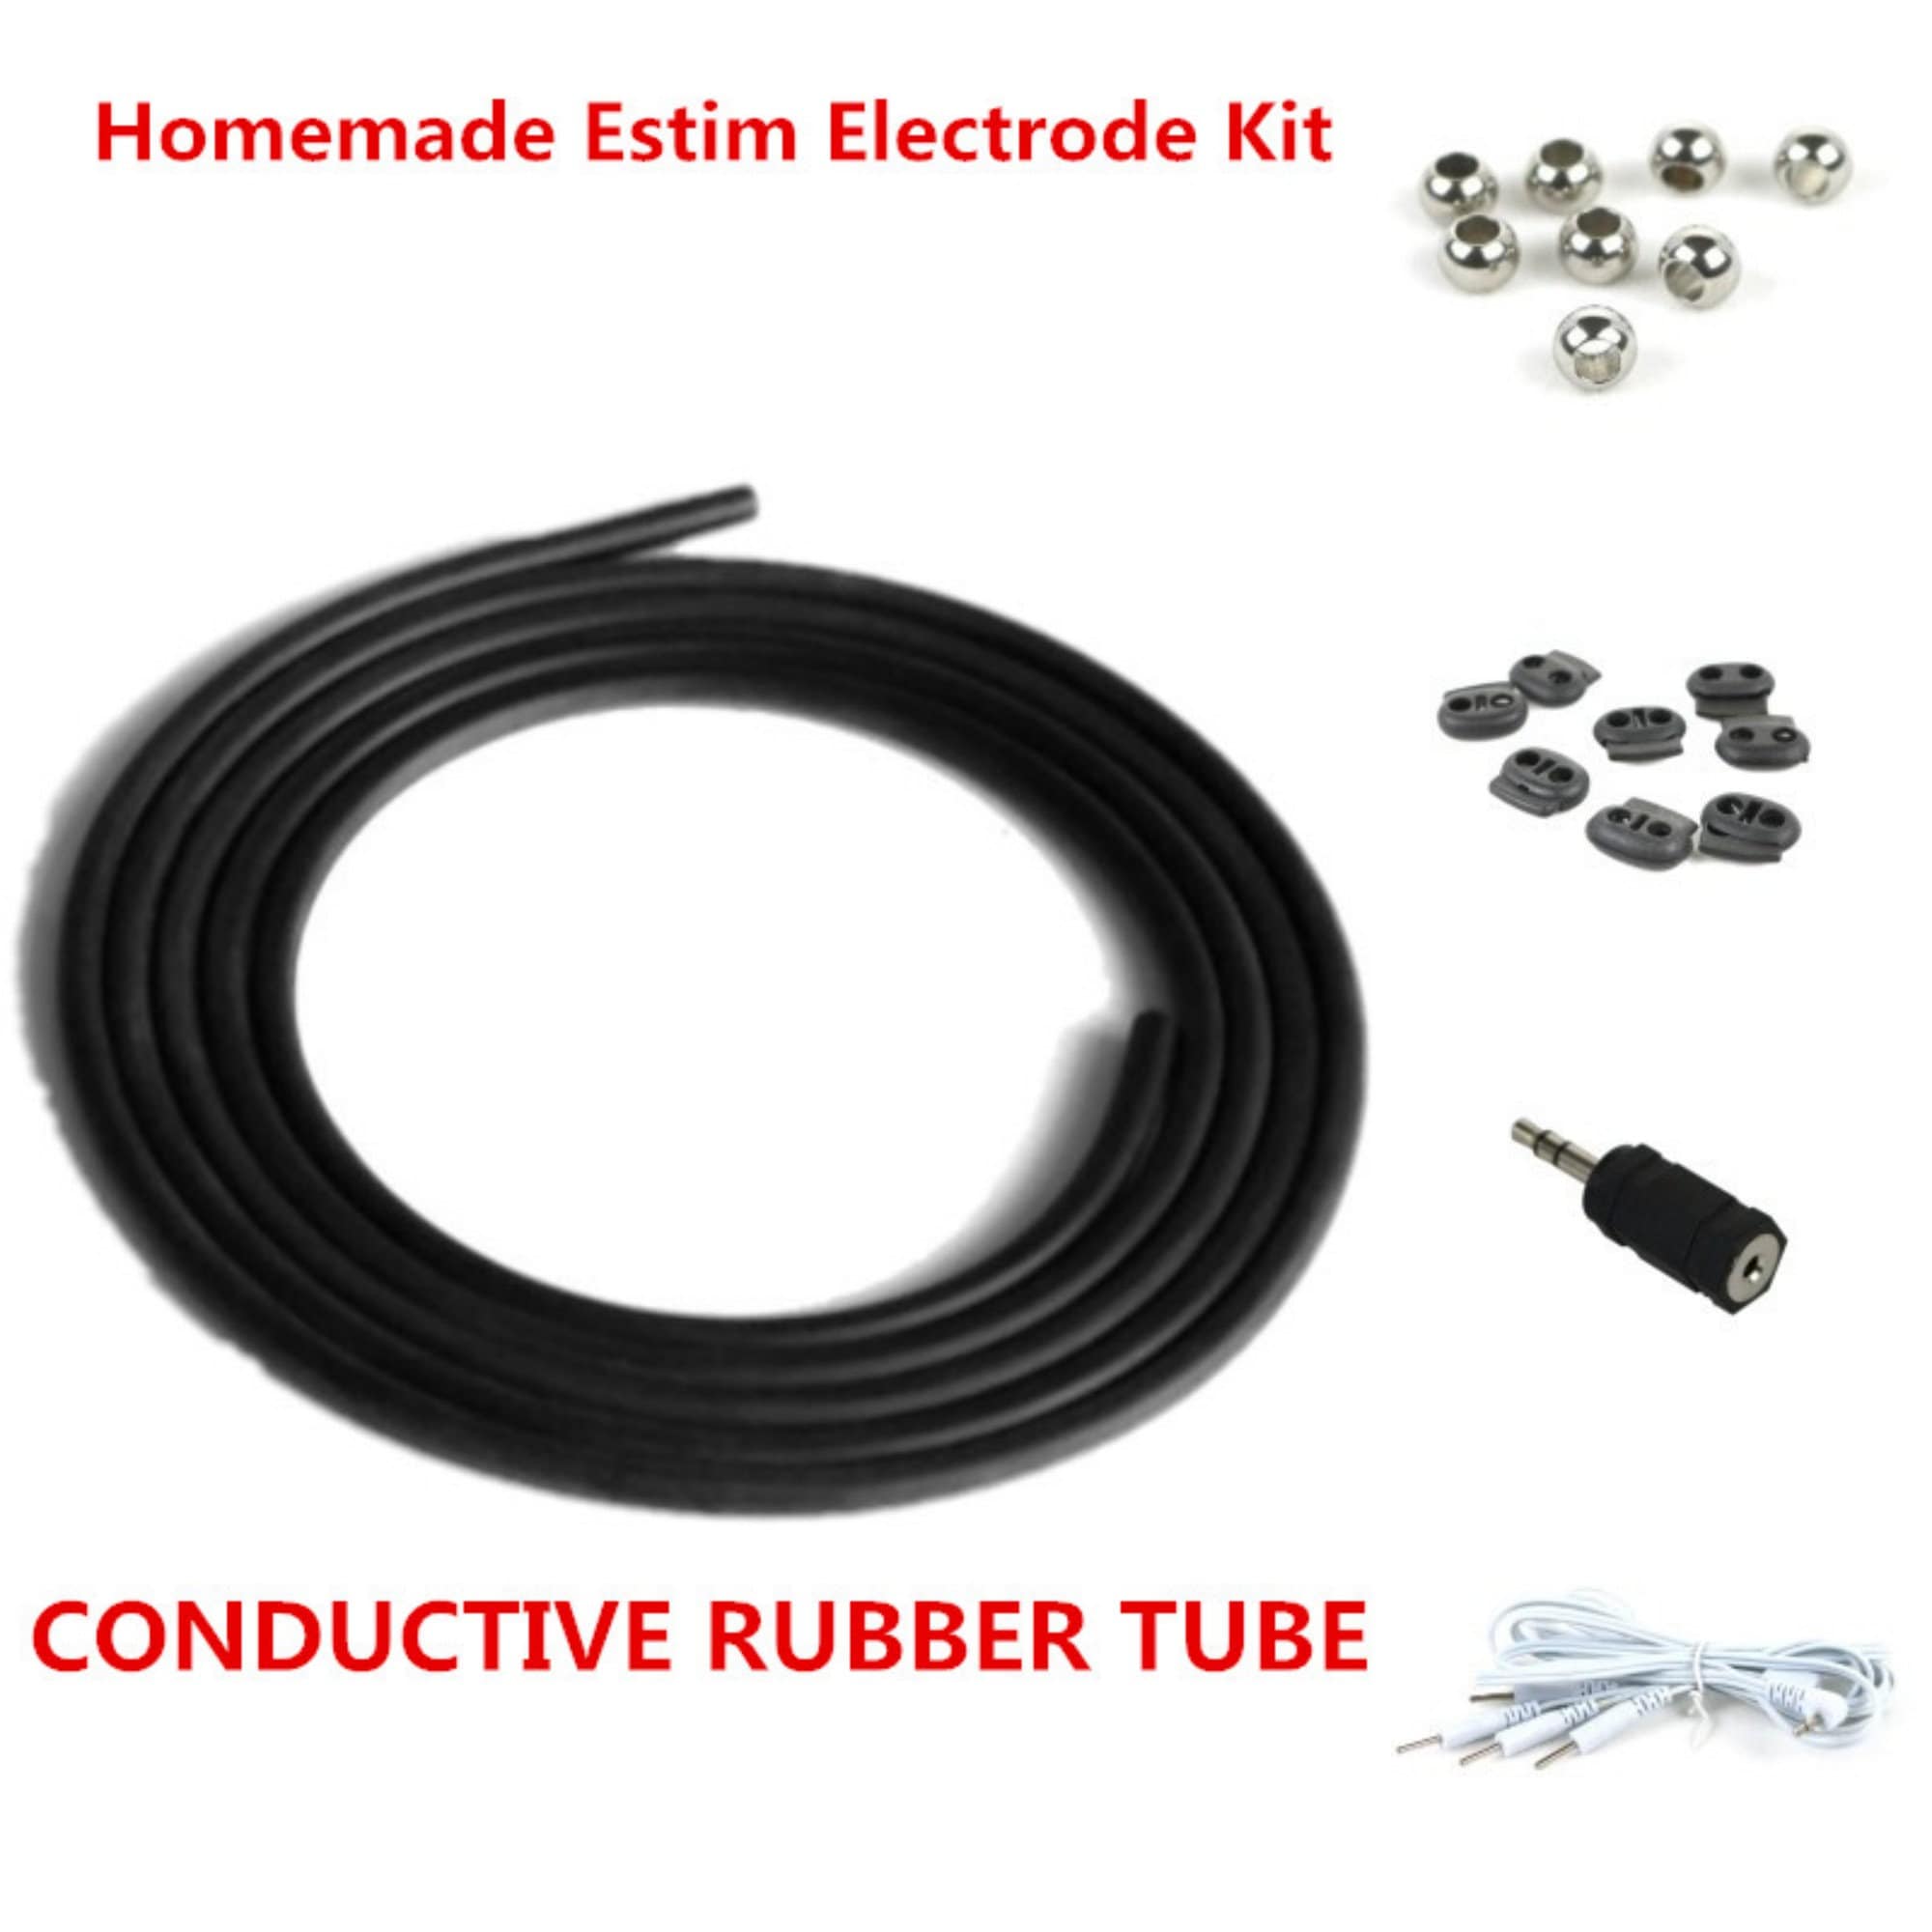 homemade electrodes for electro sex Adult Pics Hq